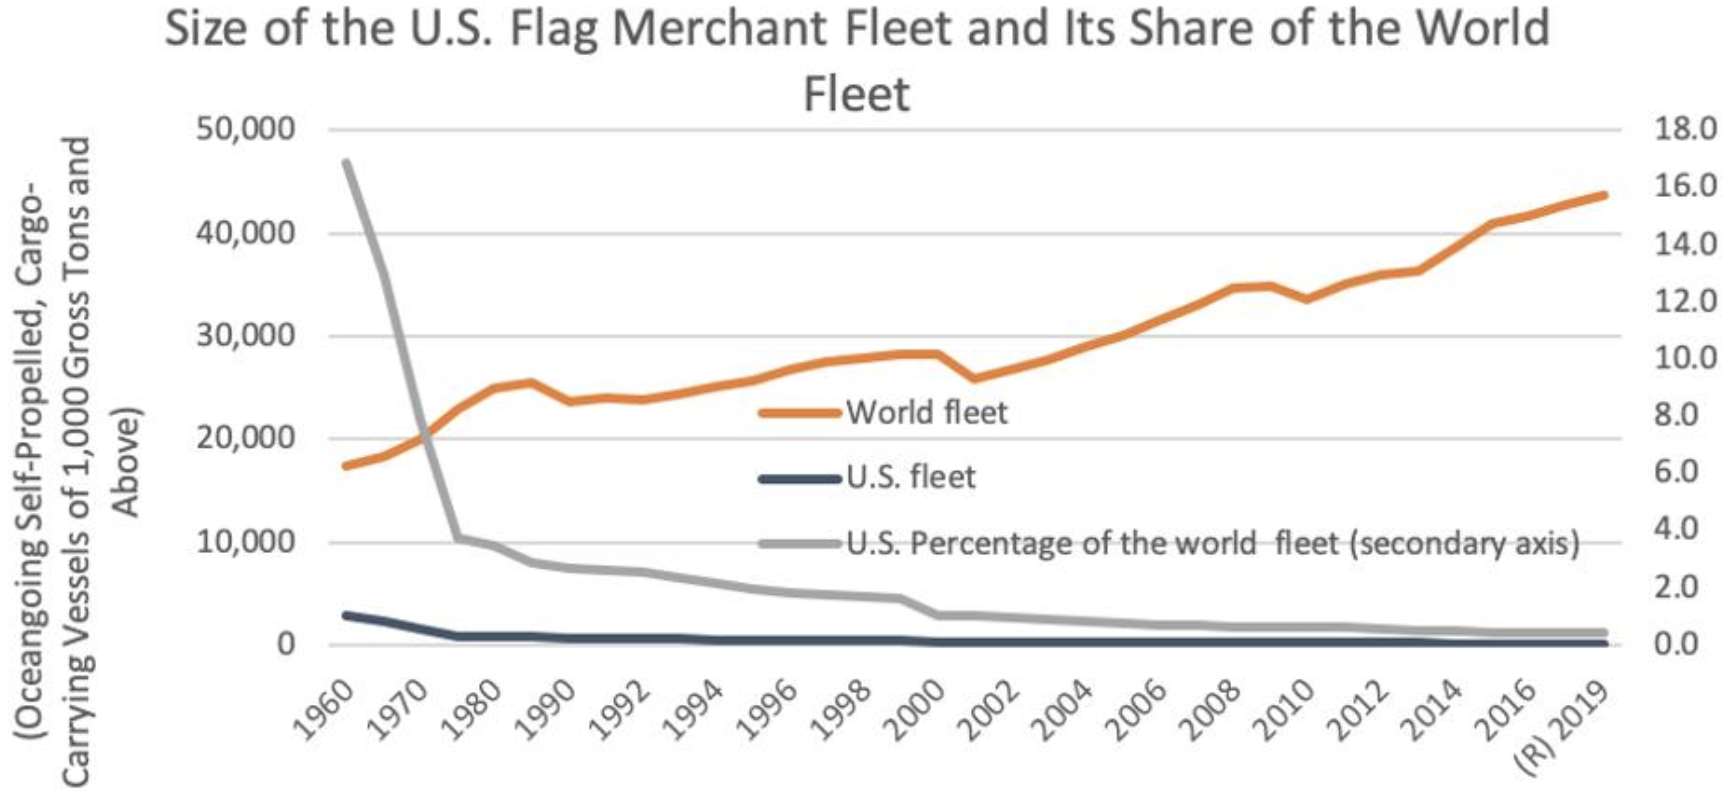 This graph shows the size of the U.S. Flag Merchant Fleet and its share of the world fleet over time.